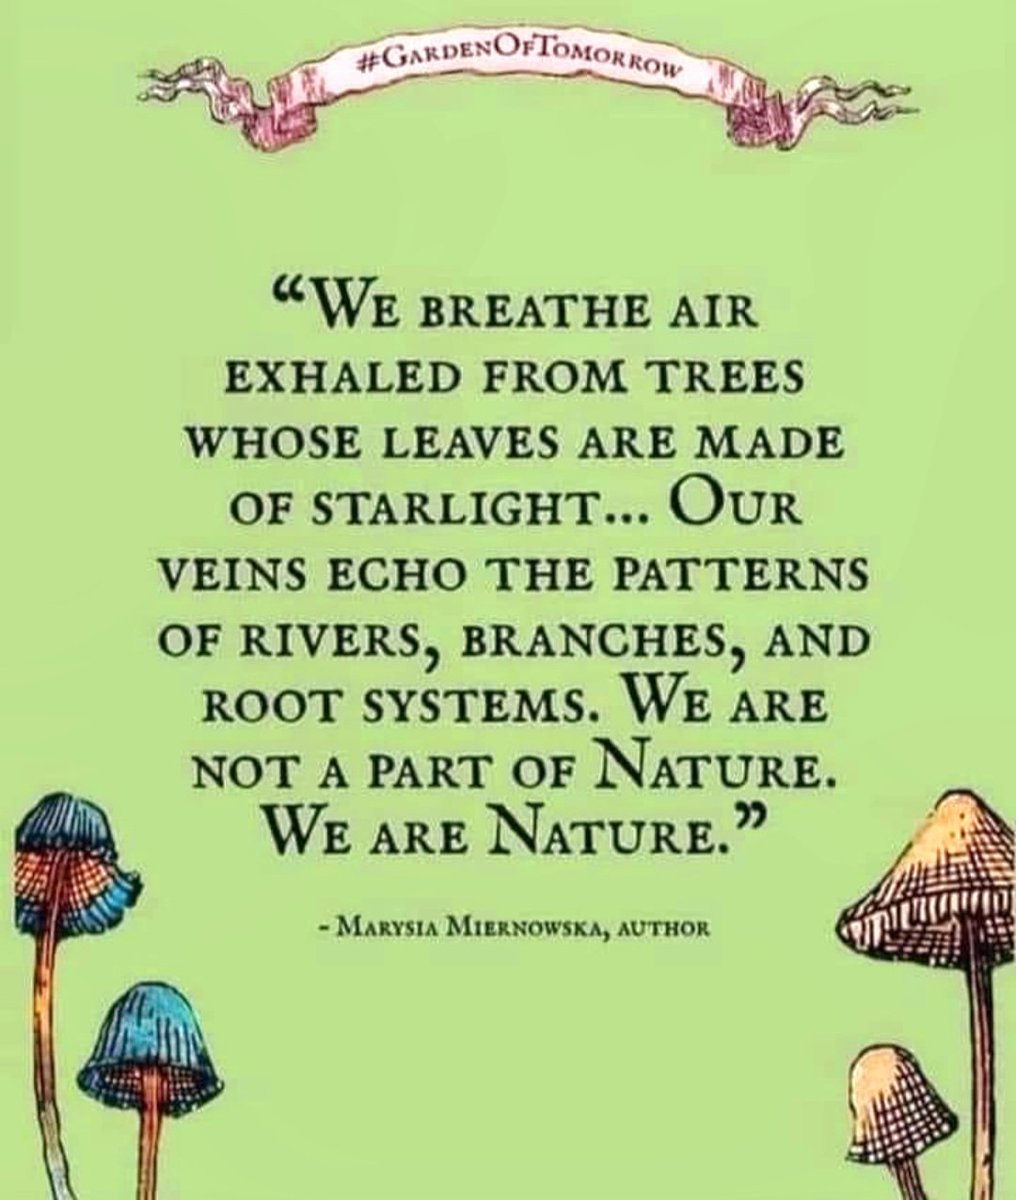 We are not a part of nature. We are one with nature...